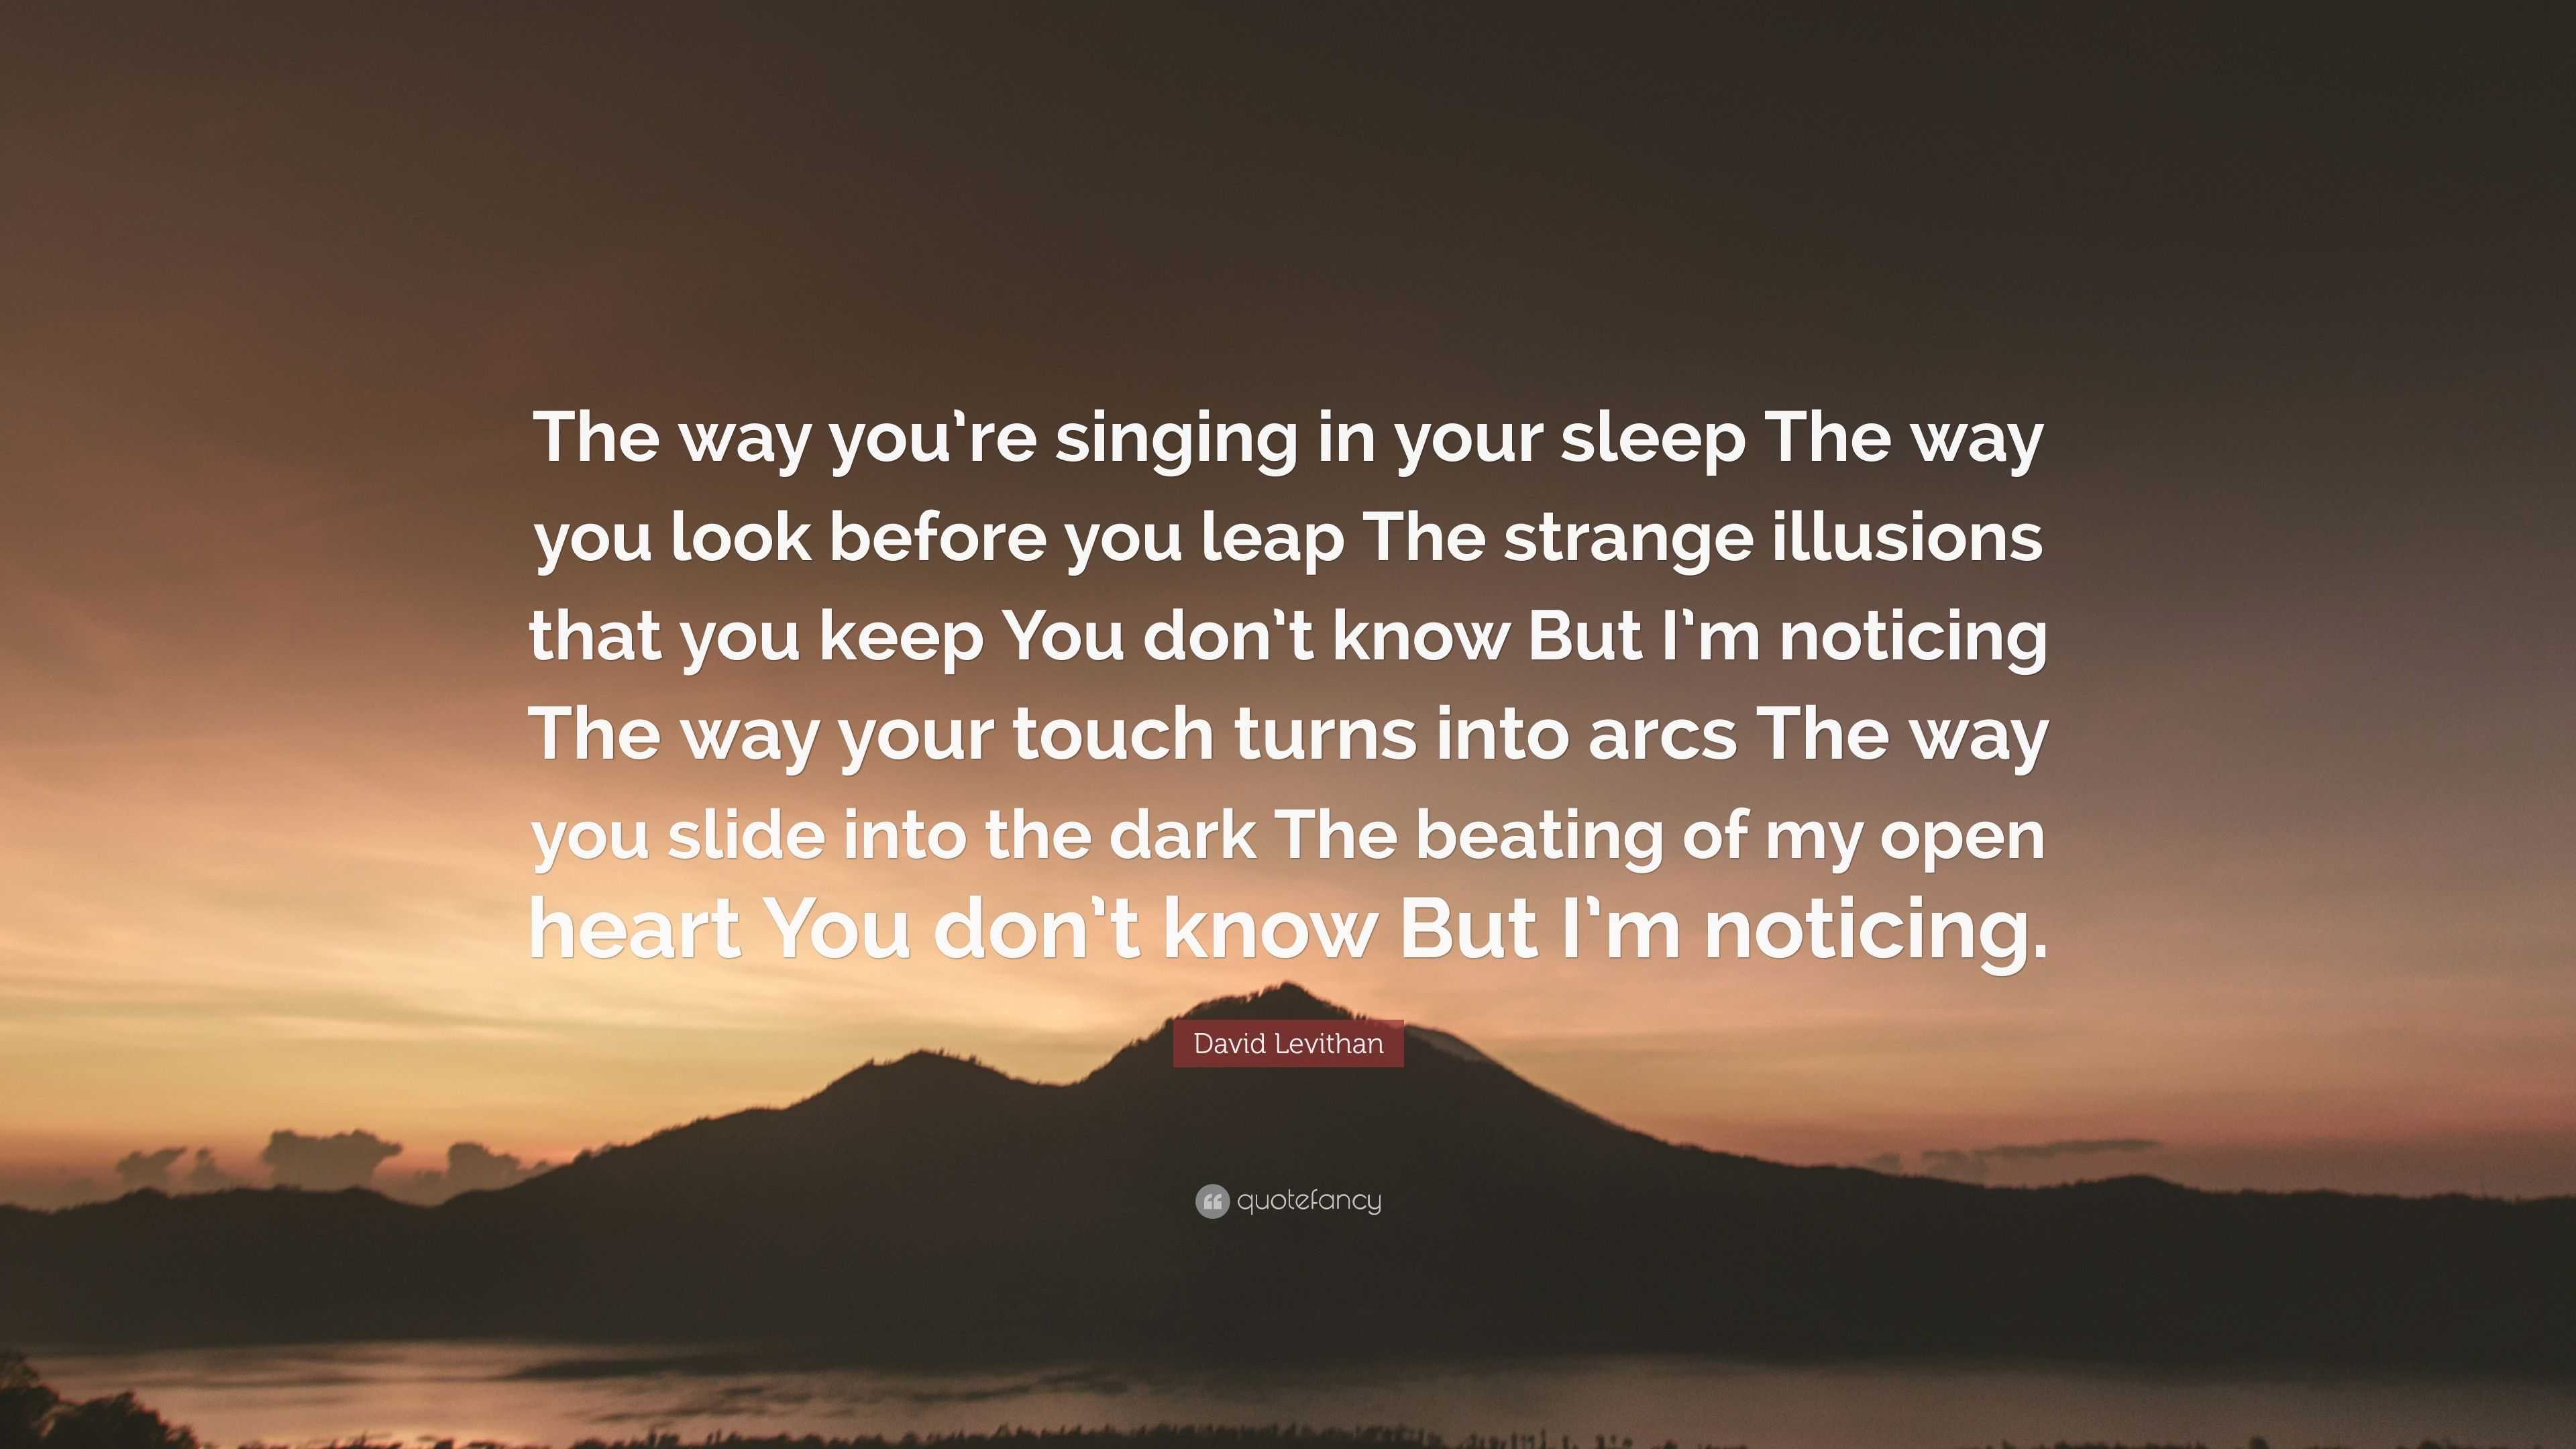 David Levithan Quote The Way You Re Singing In Your Sleep The Way You Look Before You Leap The Strange Illusions That You Keep You Don T Know